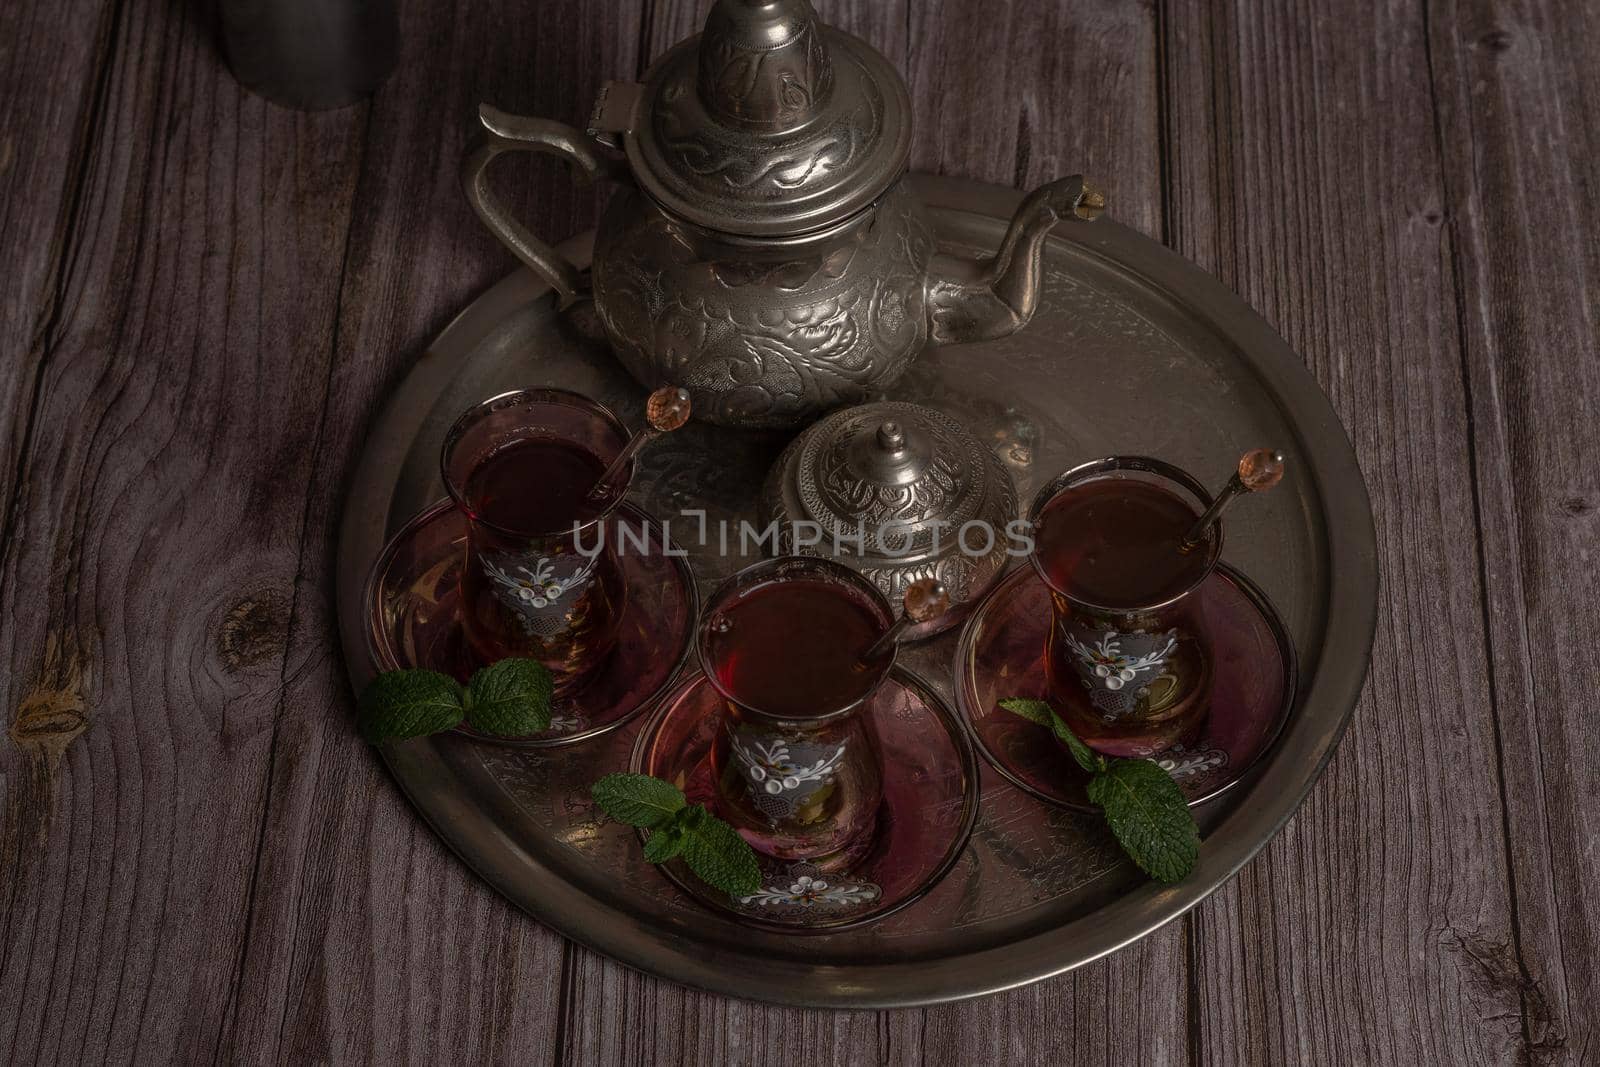 tray with glasses and serving pitcher of authentic Moorish tea ready to drink with mint leaves